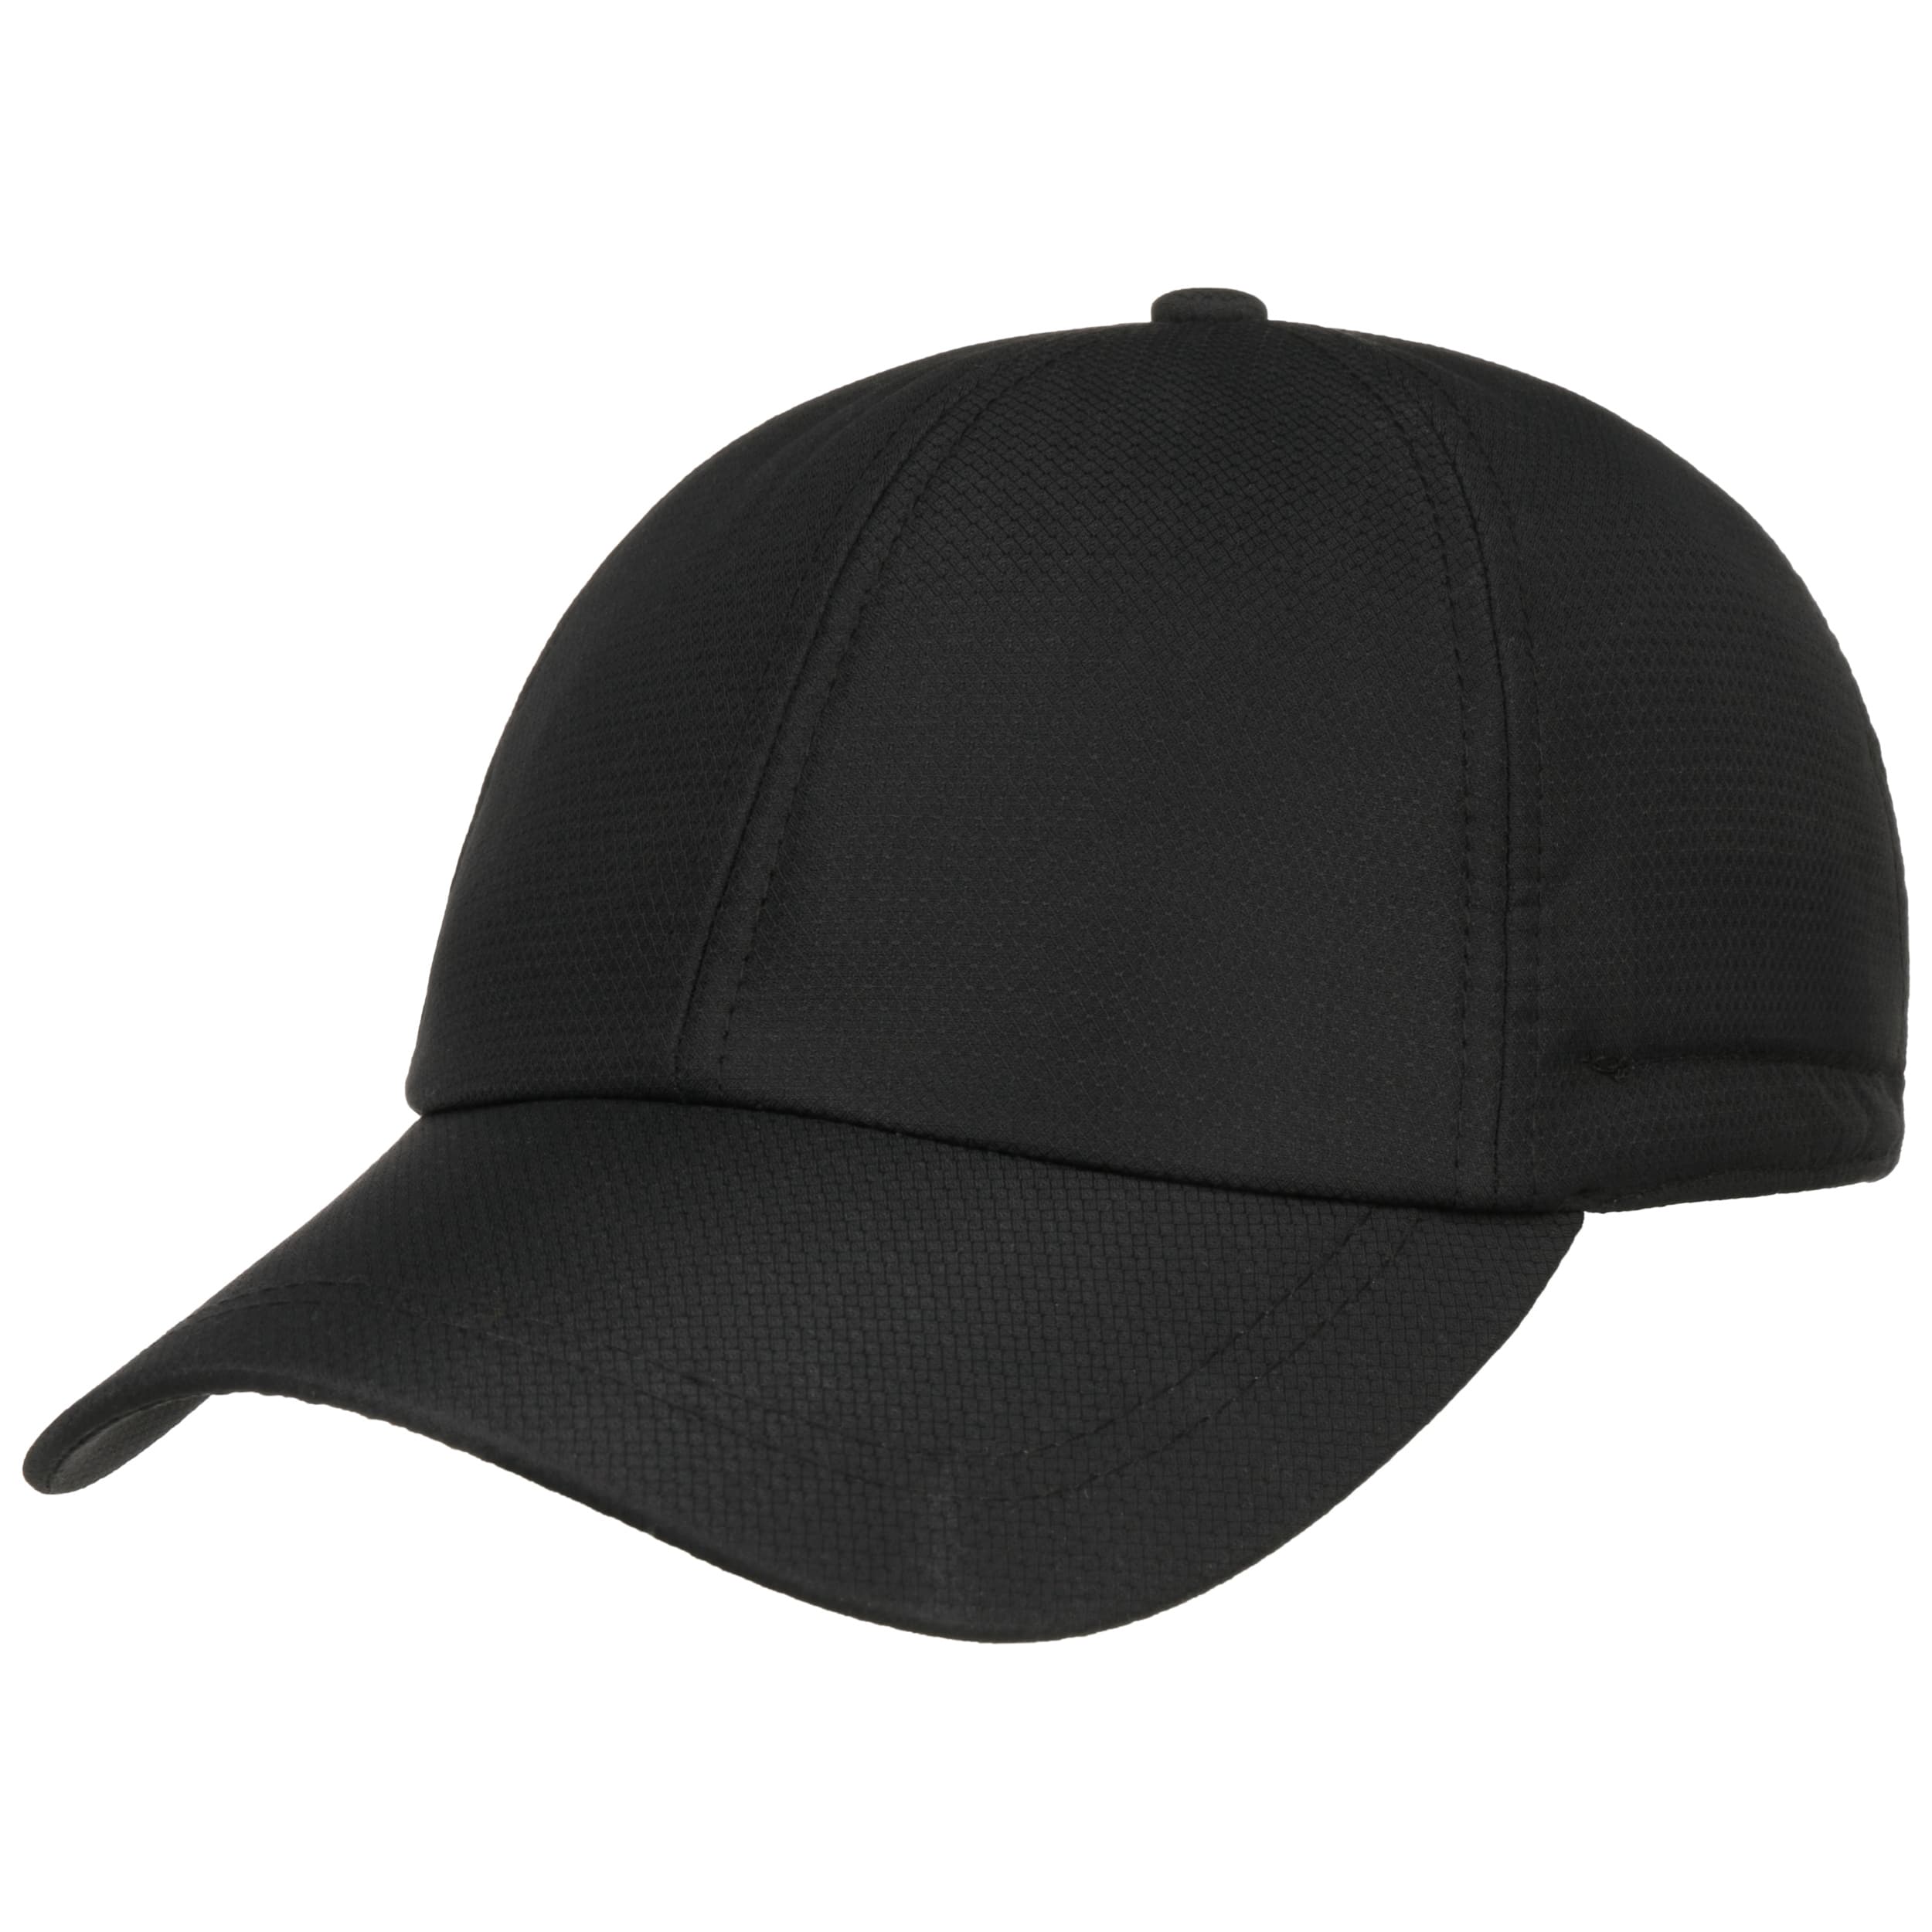 Thinsulate 3M - 29,95 Cap € by Ohrenklappen mit Lipodo